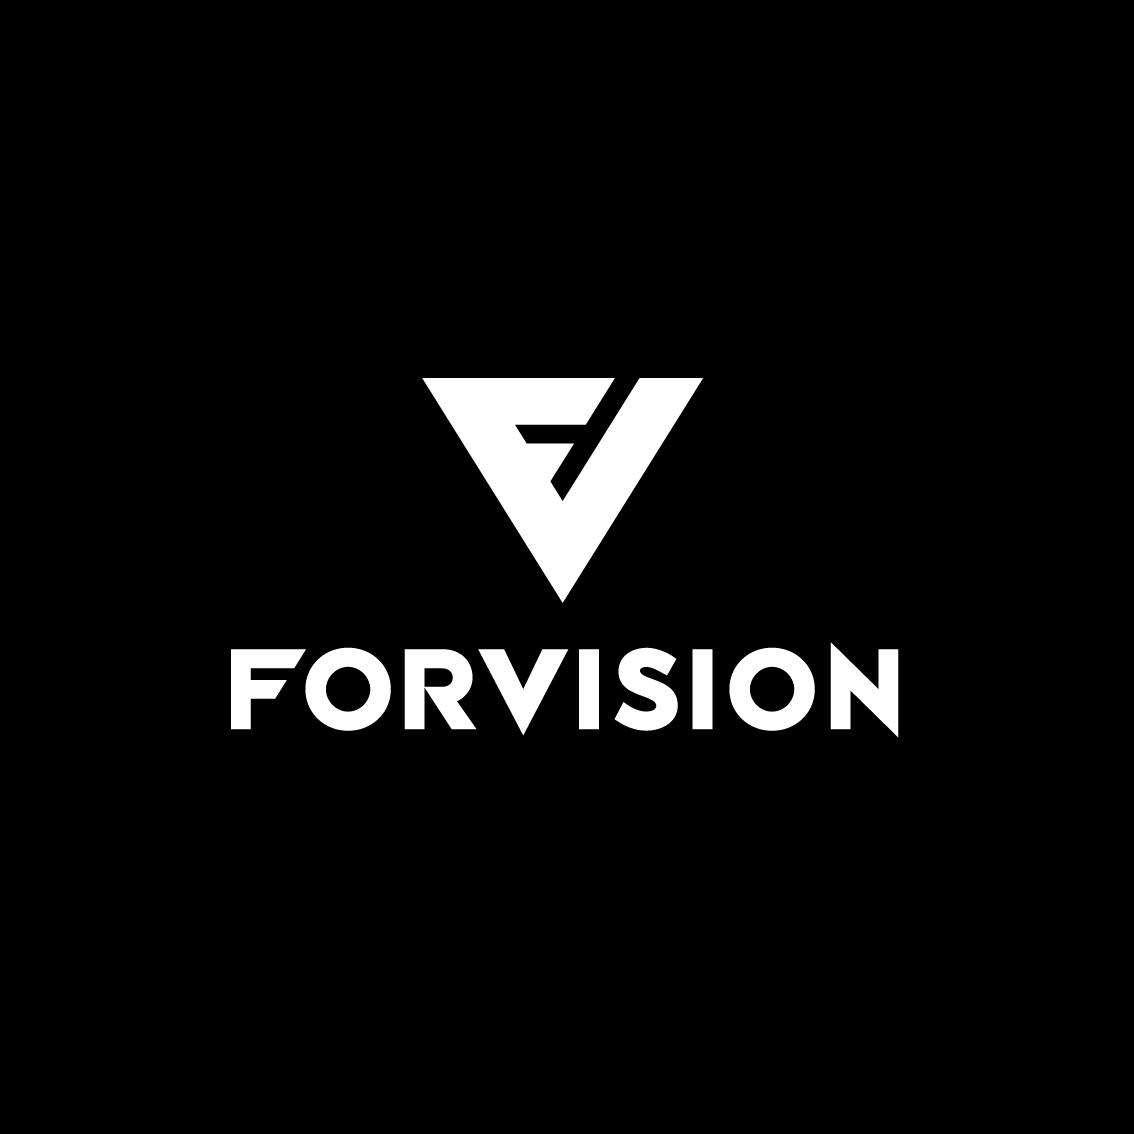 FORVISION